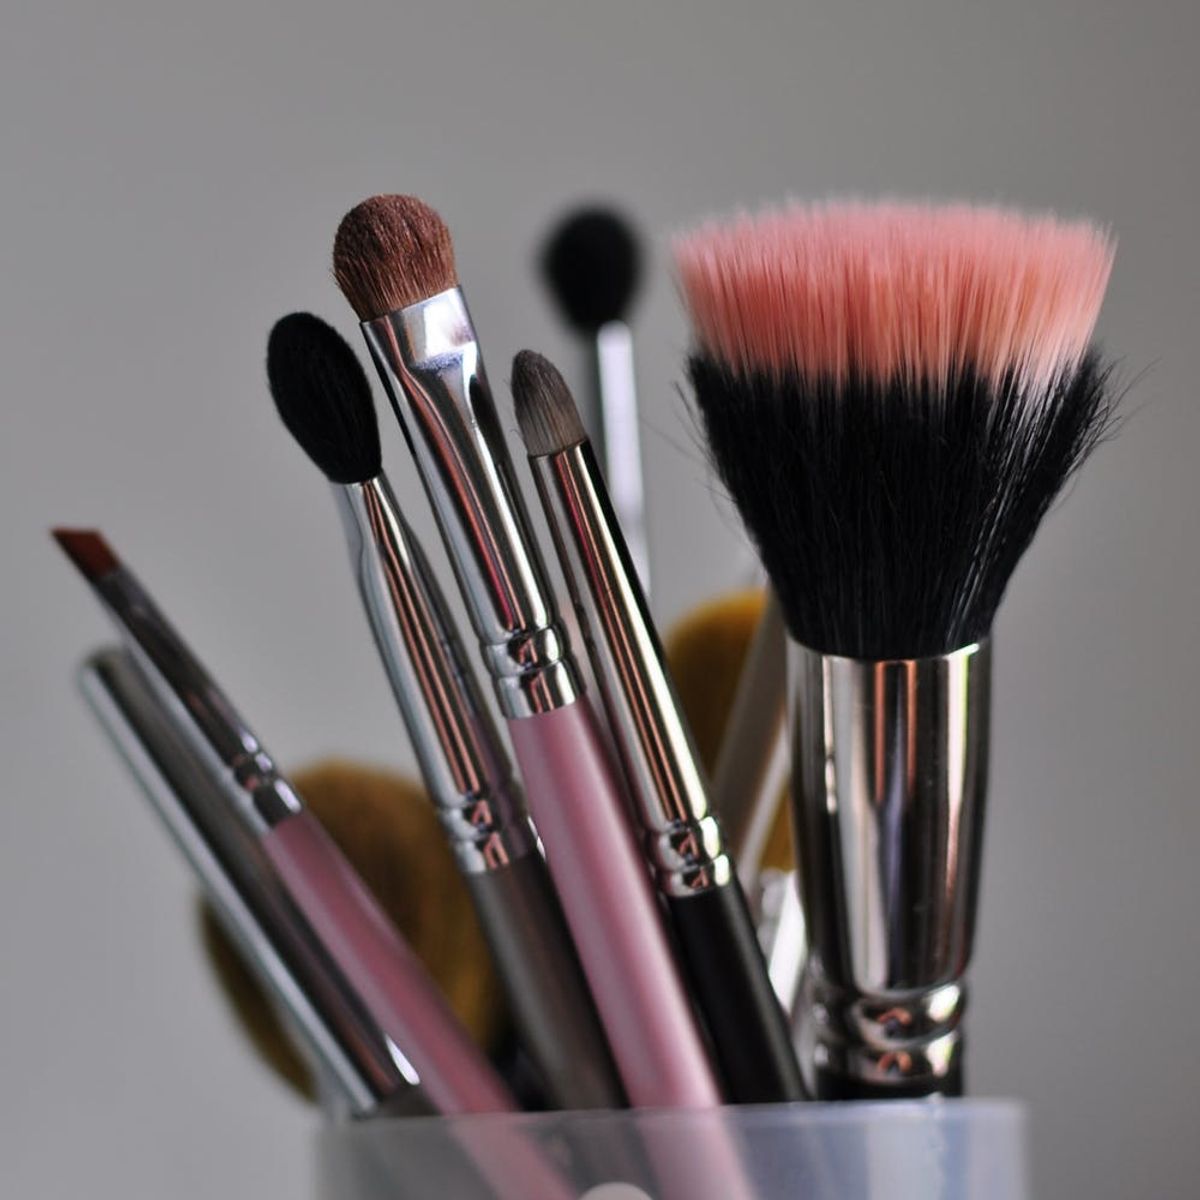 This Woman’s Trip to the Emergency Room Will Convince You to Clean Your Makeup Brushes